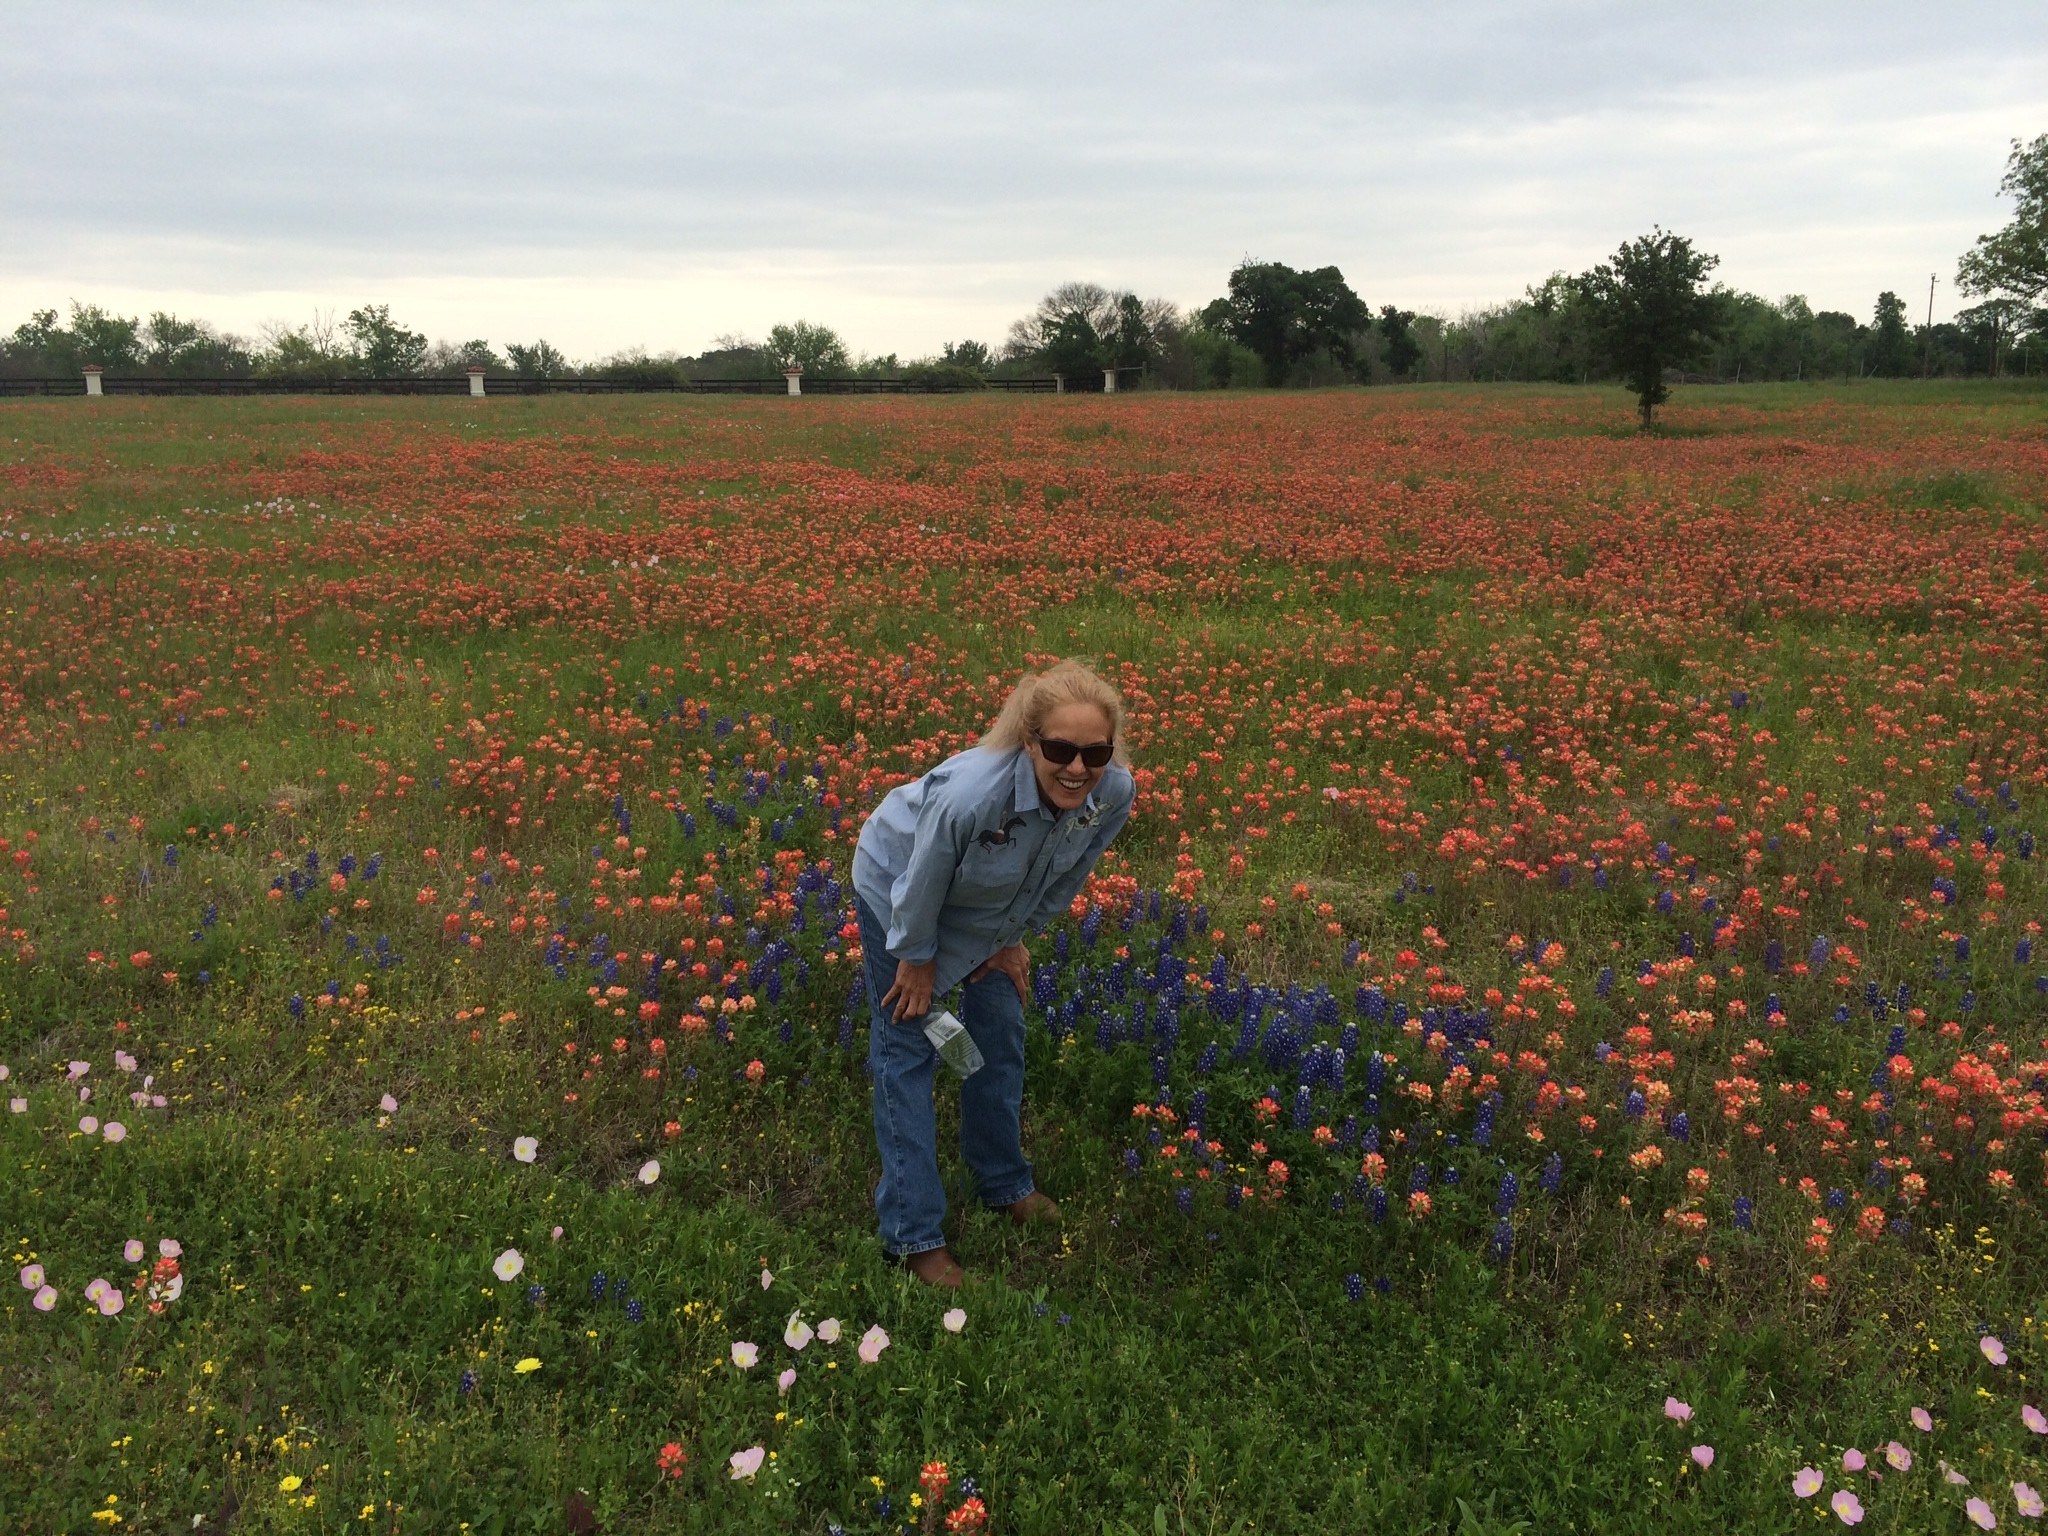 2048x1536 From Nacogdoches we head west looking for the Texas Bluebonnets  that,according to wildflower web sites, are at their peak. Around Conroe  Texas we have our ...